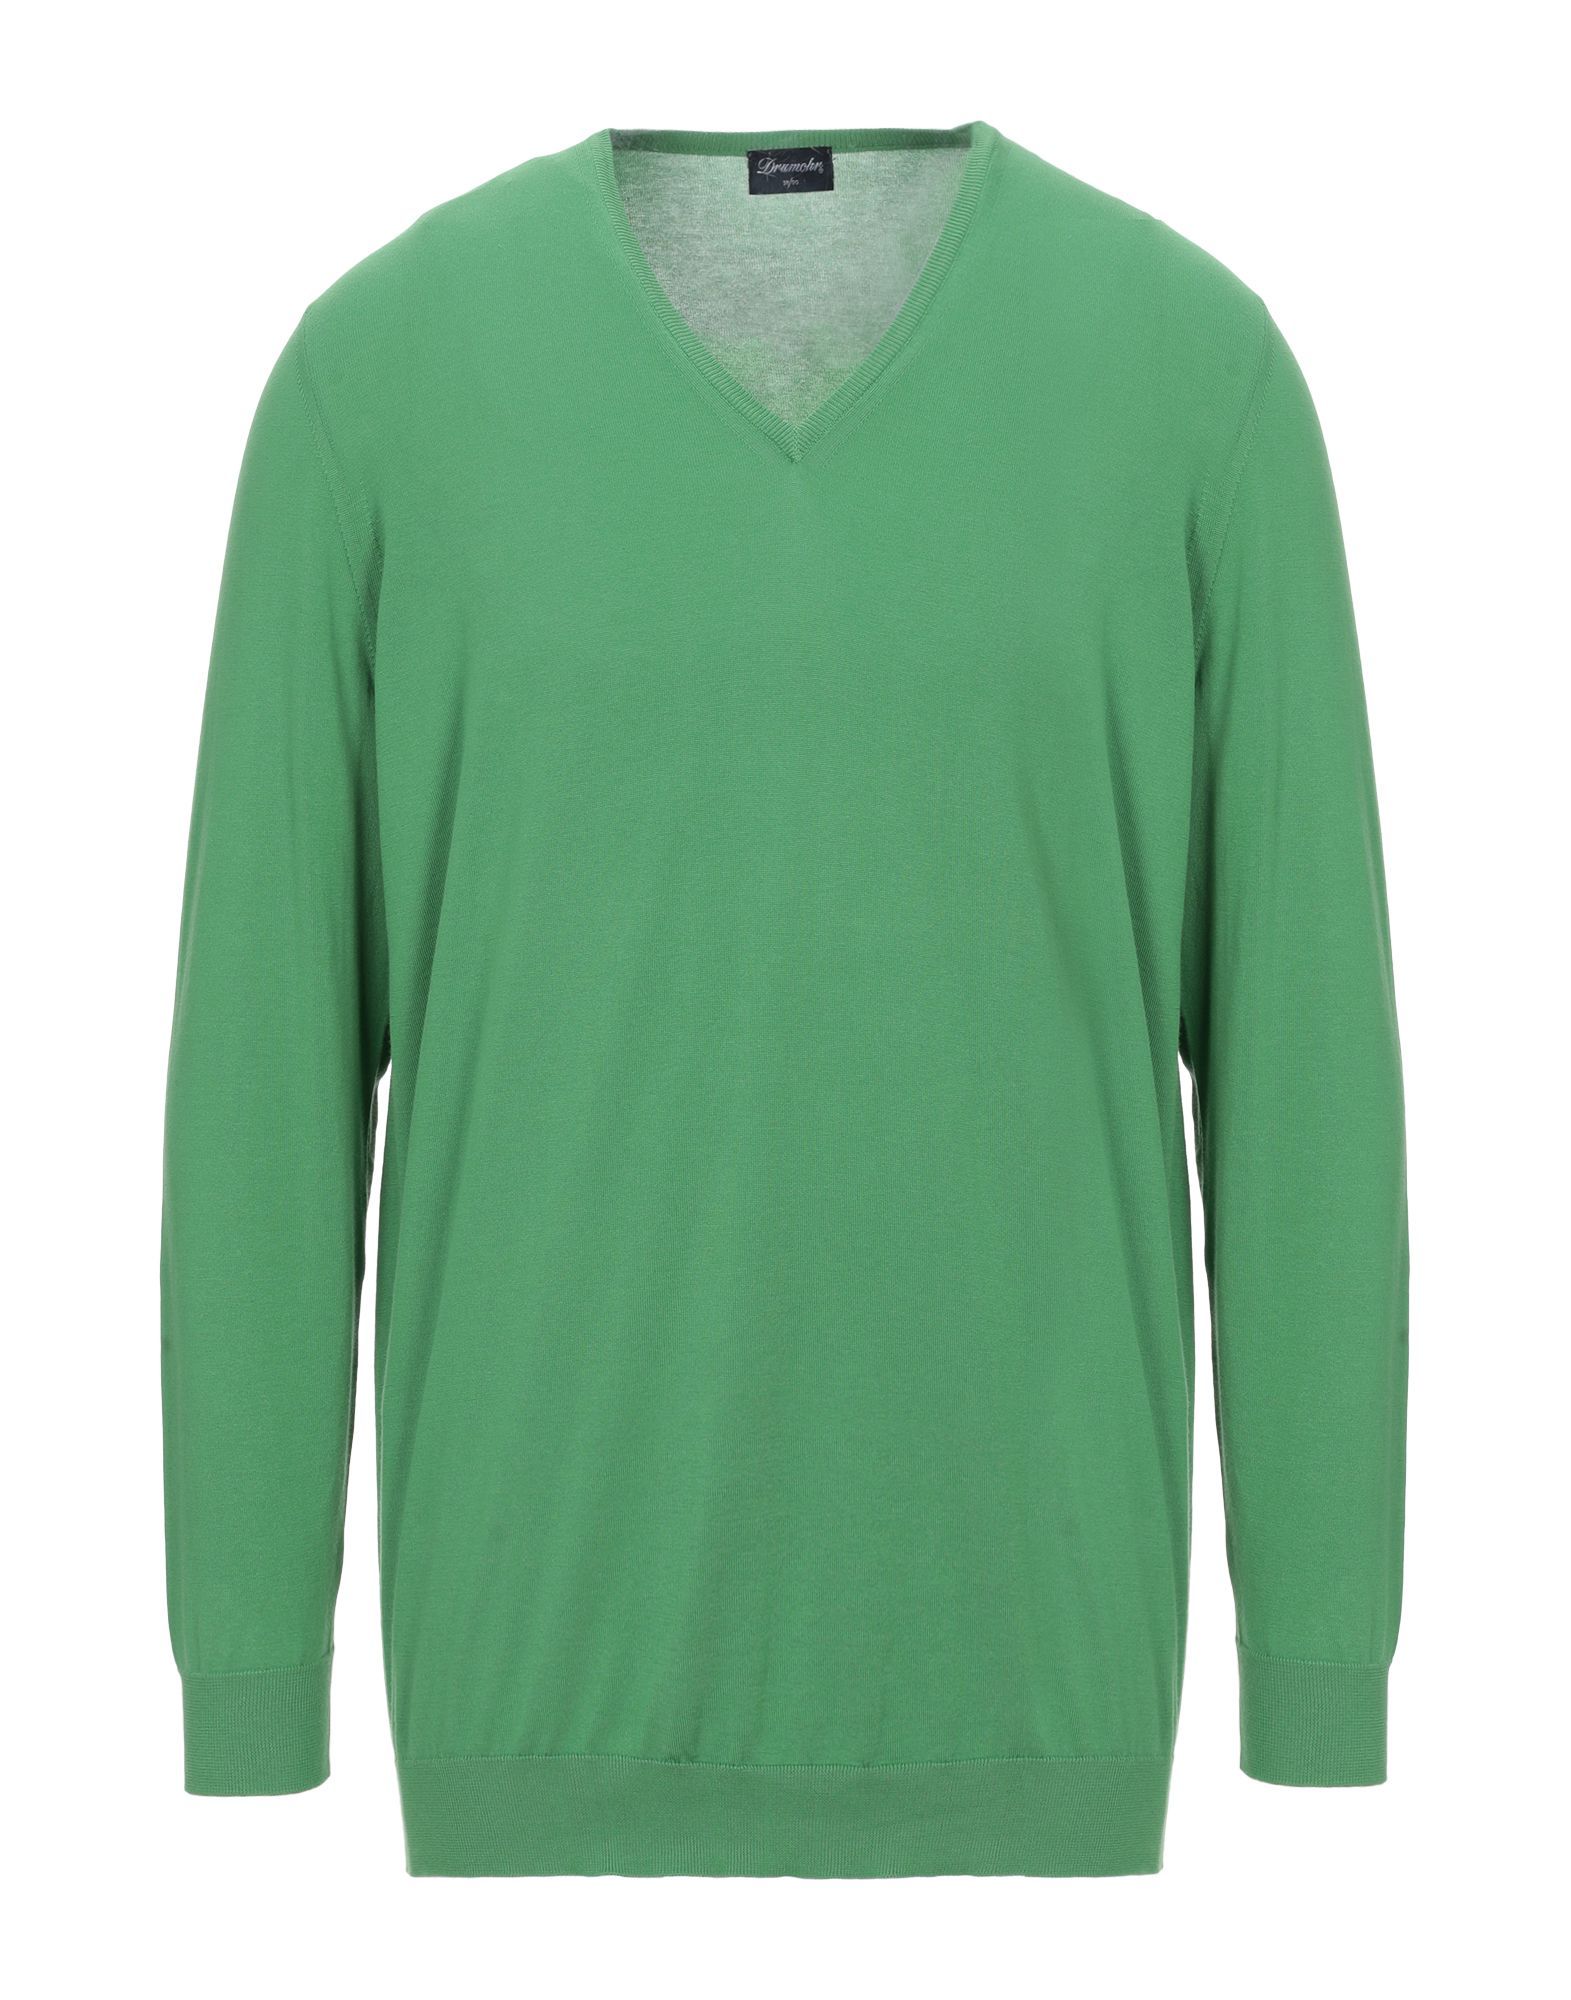 knitted, no appliqués, lightweight knit, v-neck, basic solid colour, long sleeves, no pockets